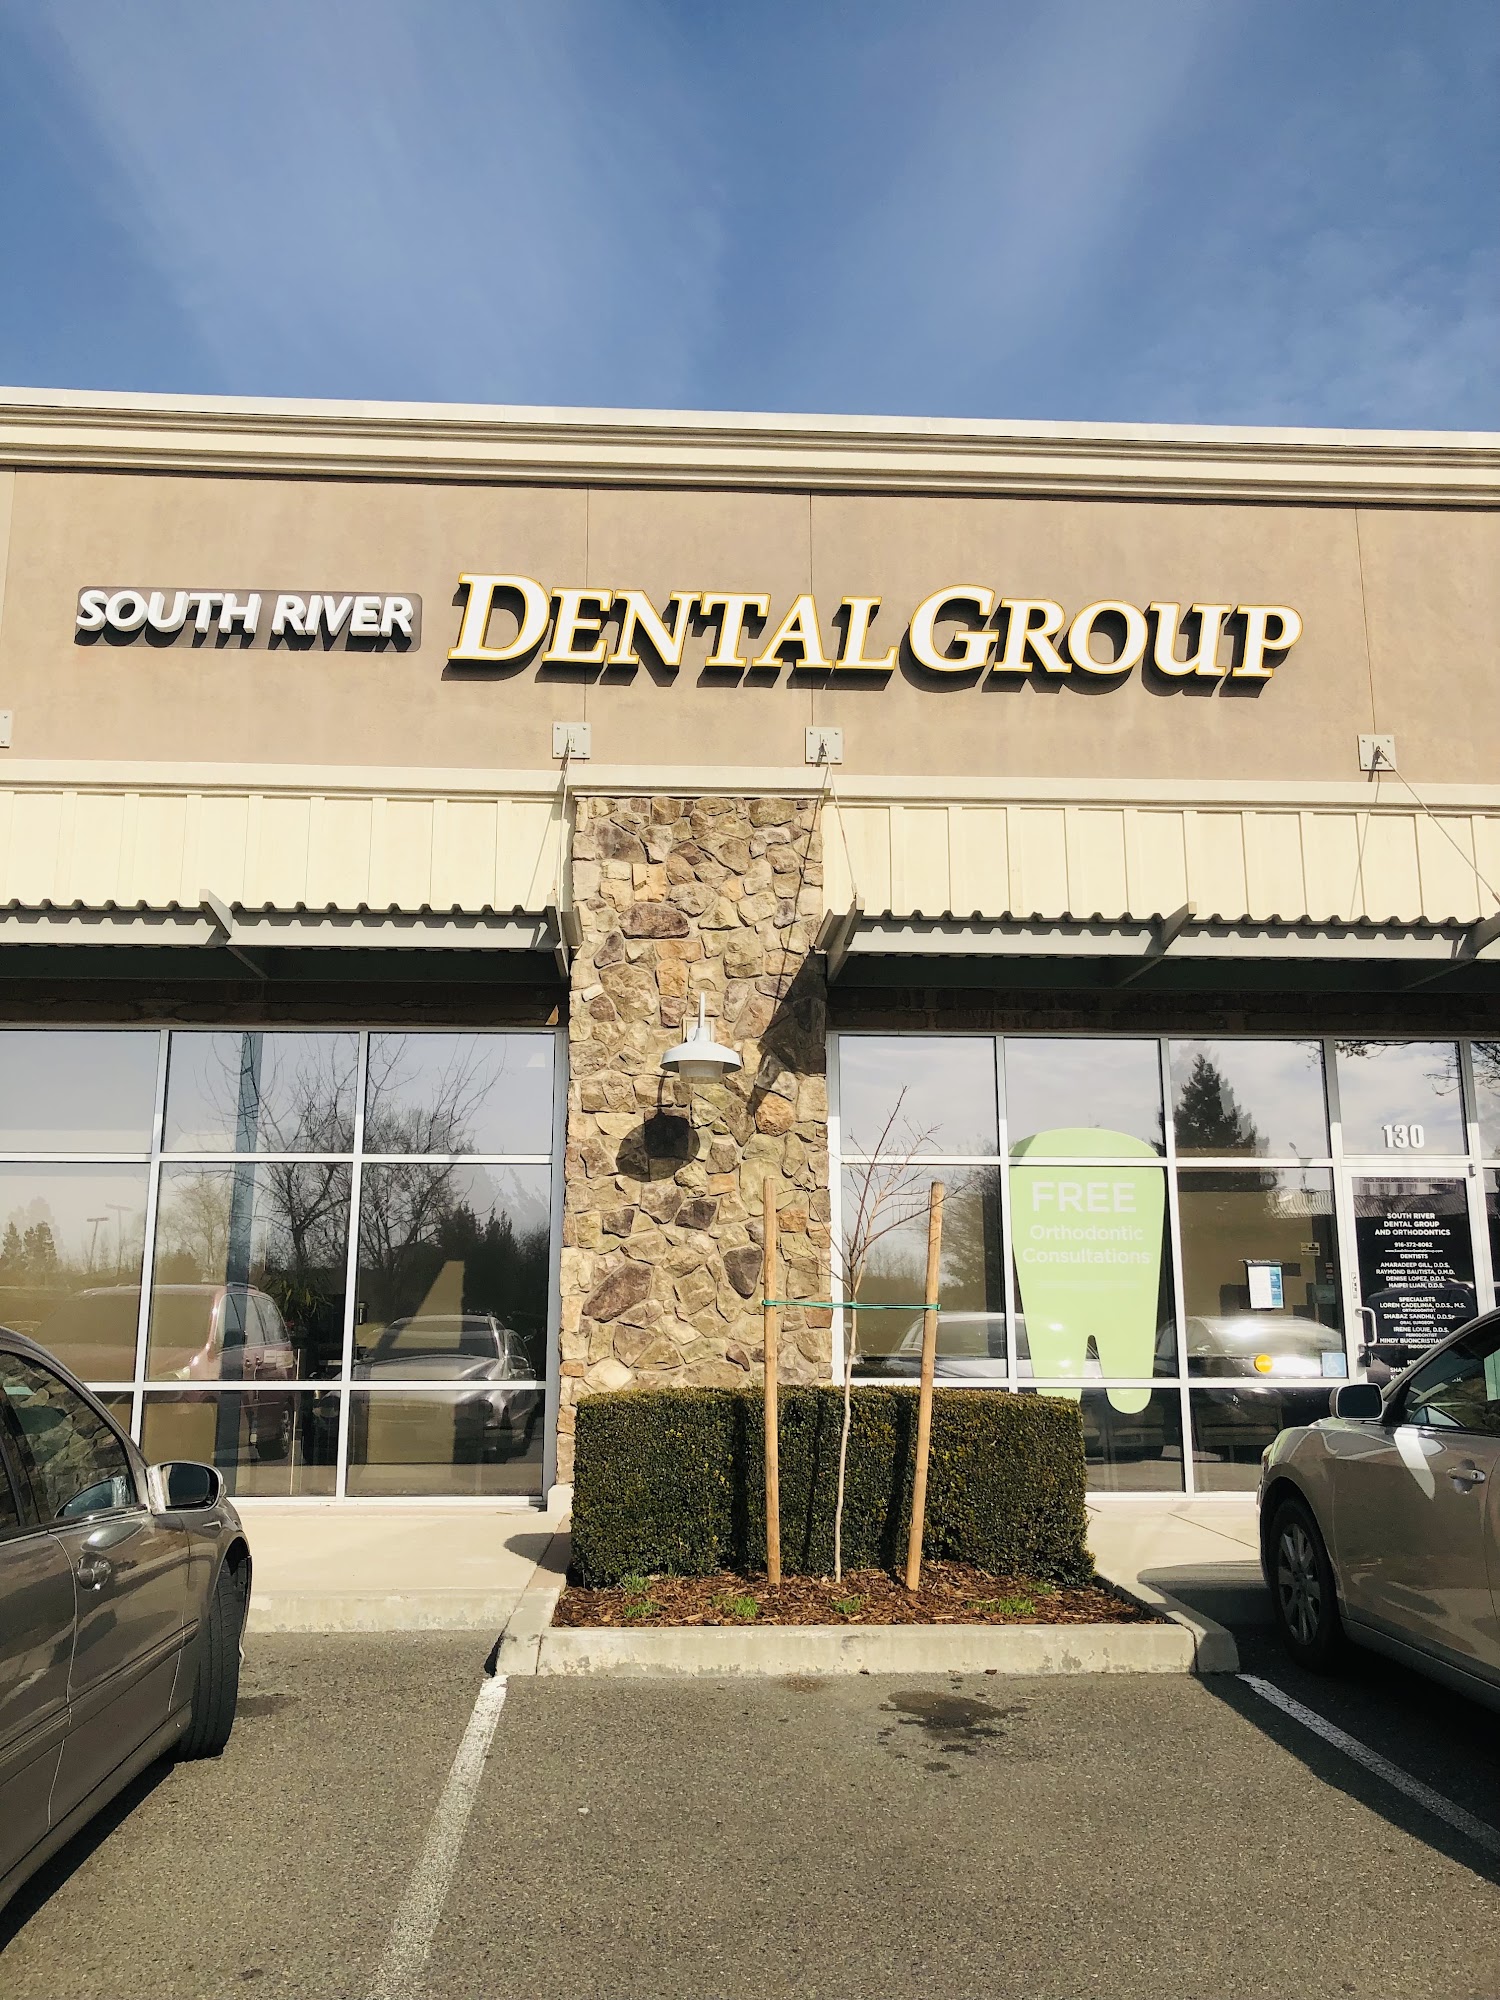 South River Dental Group and Orthodontics